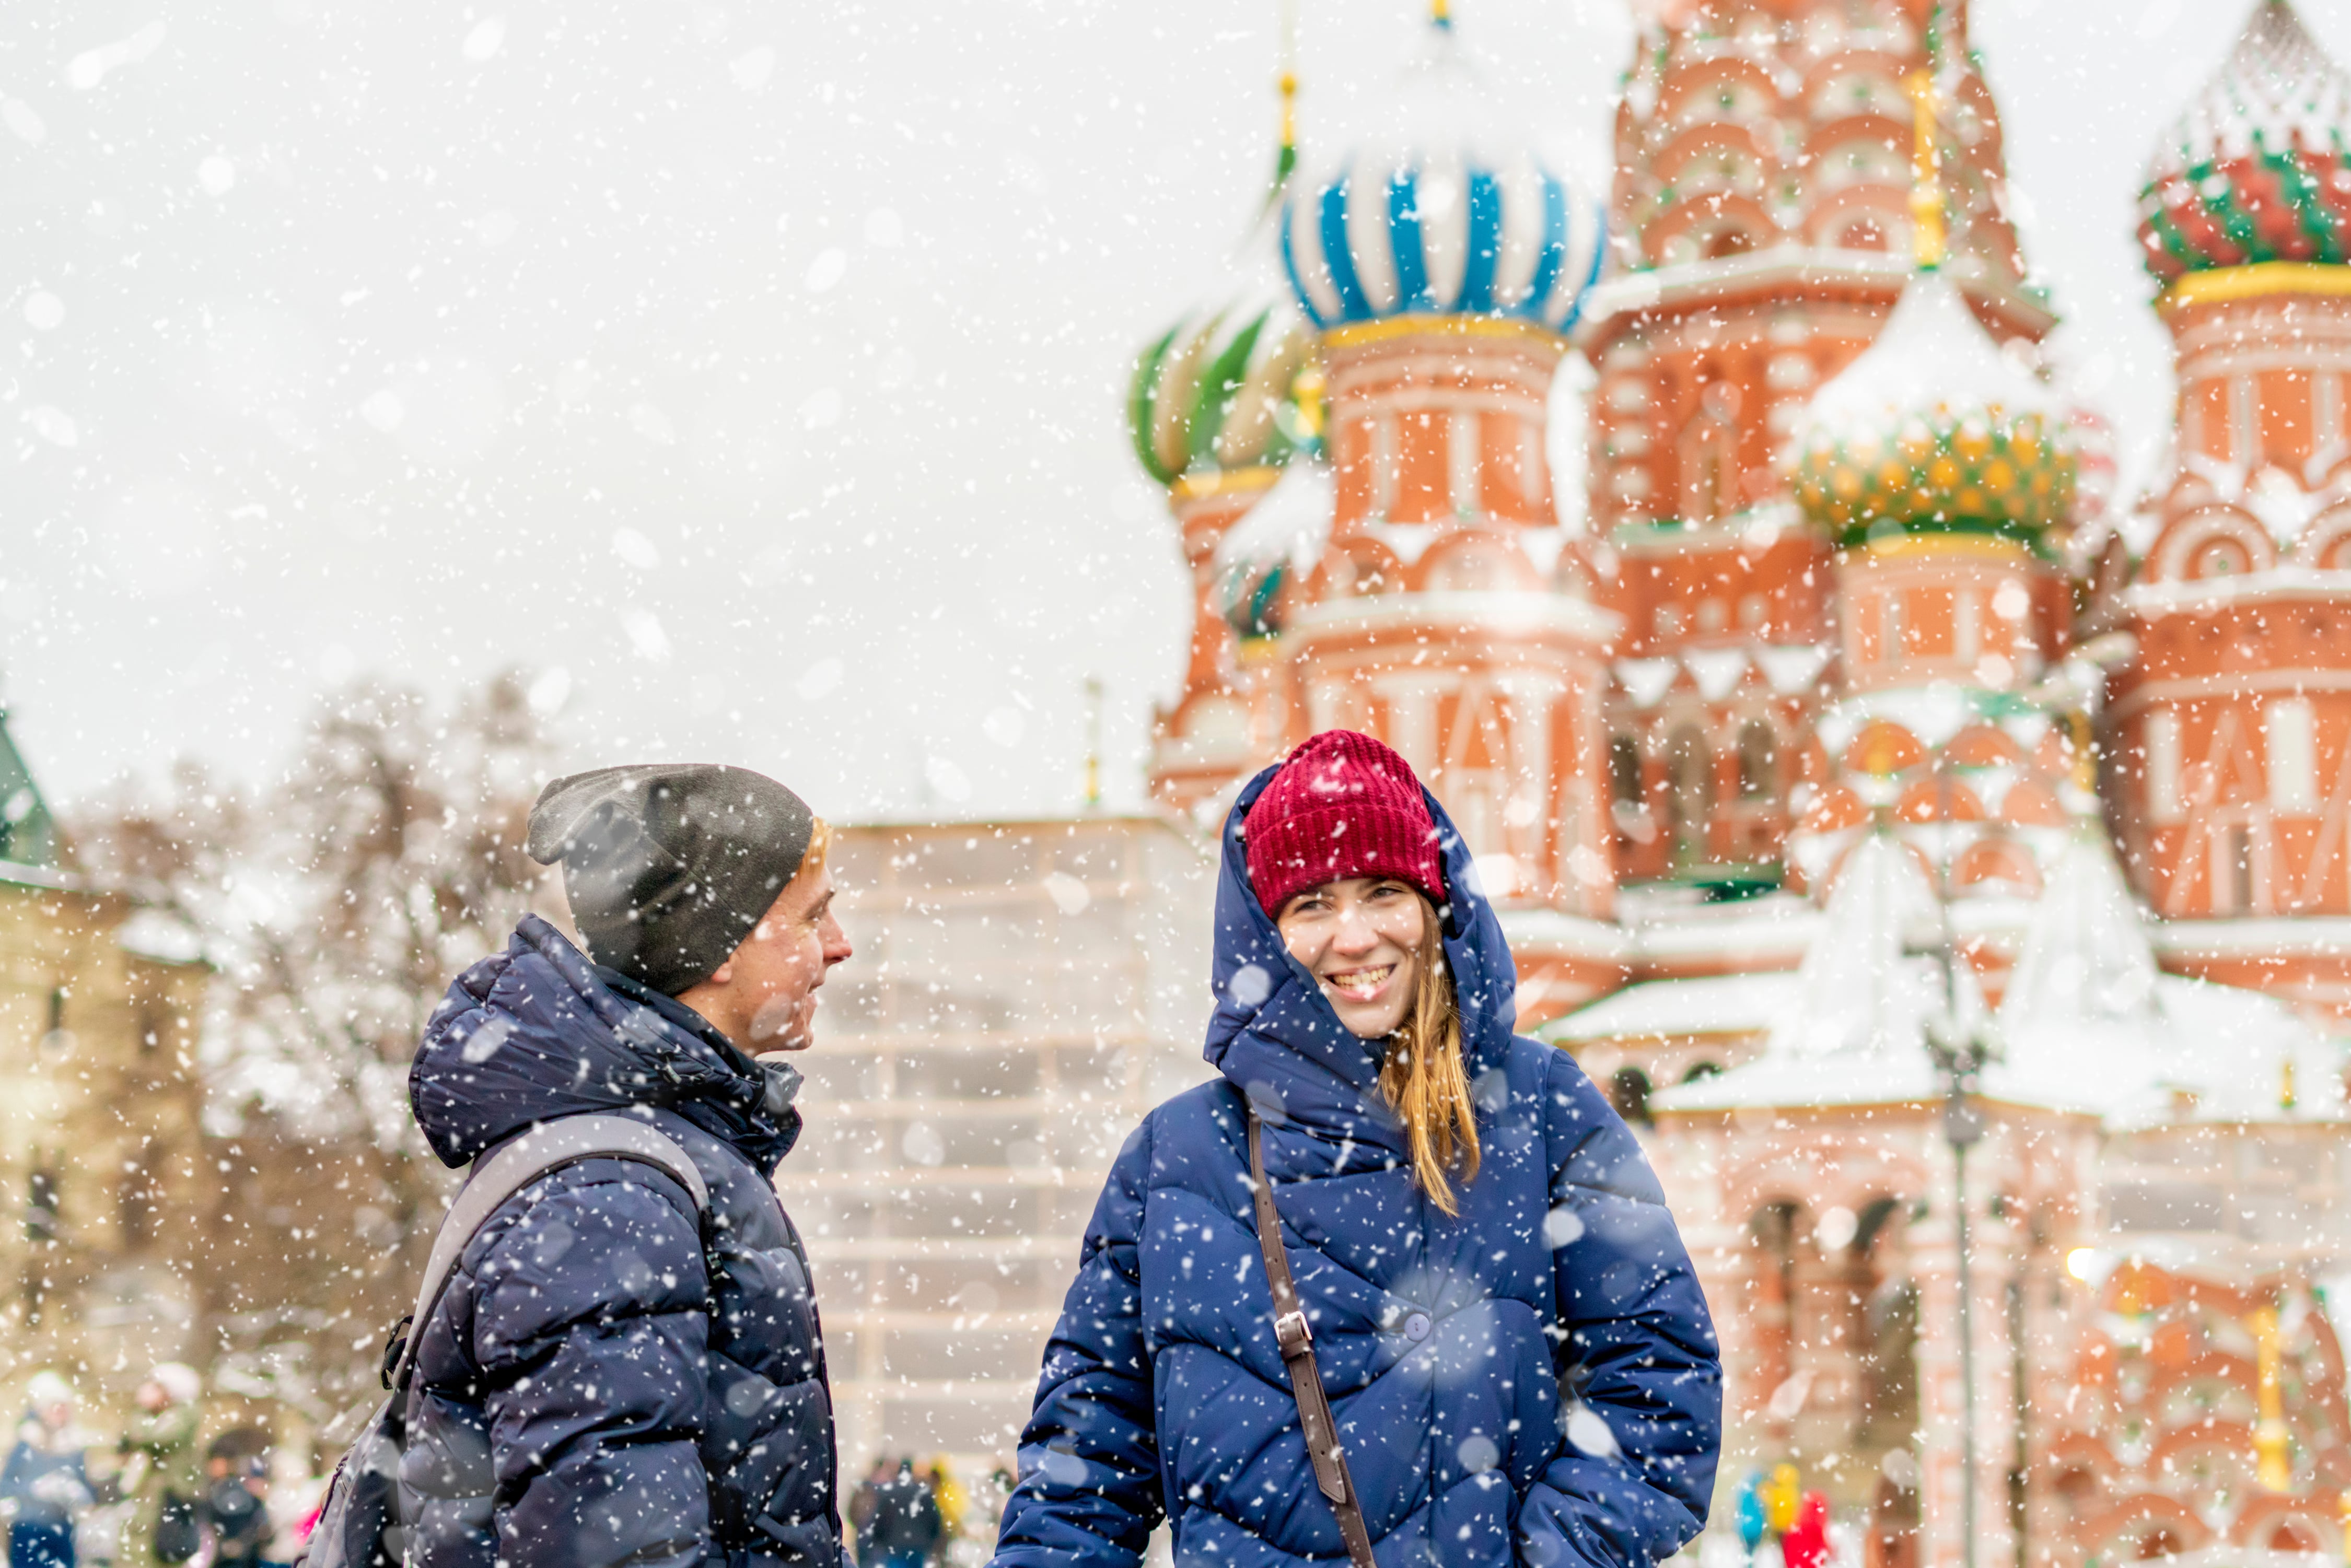 Man and woman wearing winter clothing of jackets and hats stand smiling outside the Kremlin in Moscow. It is snowing.